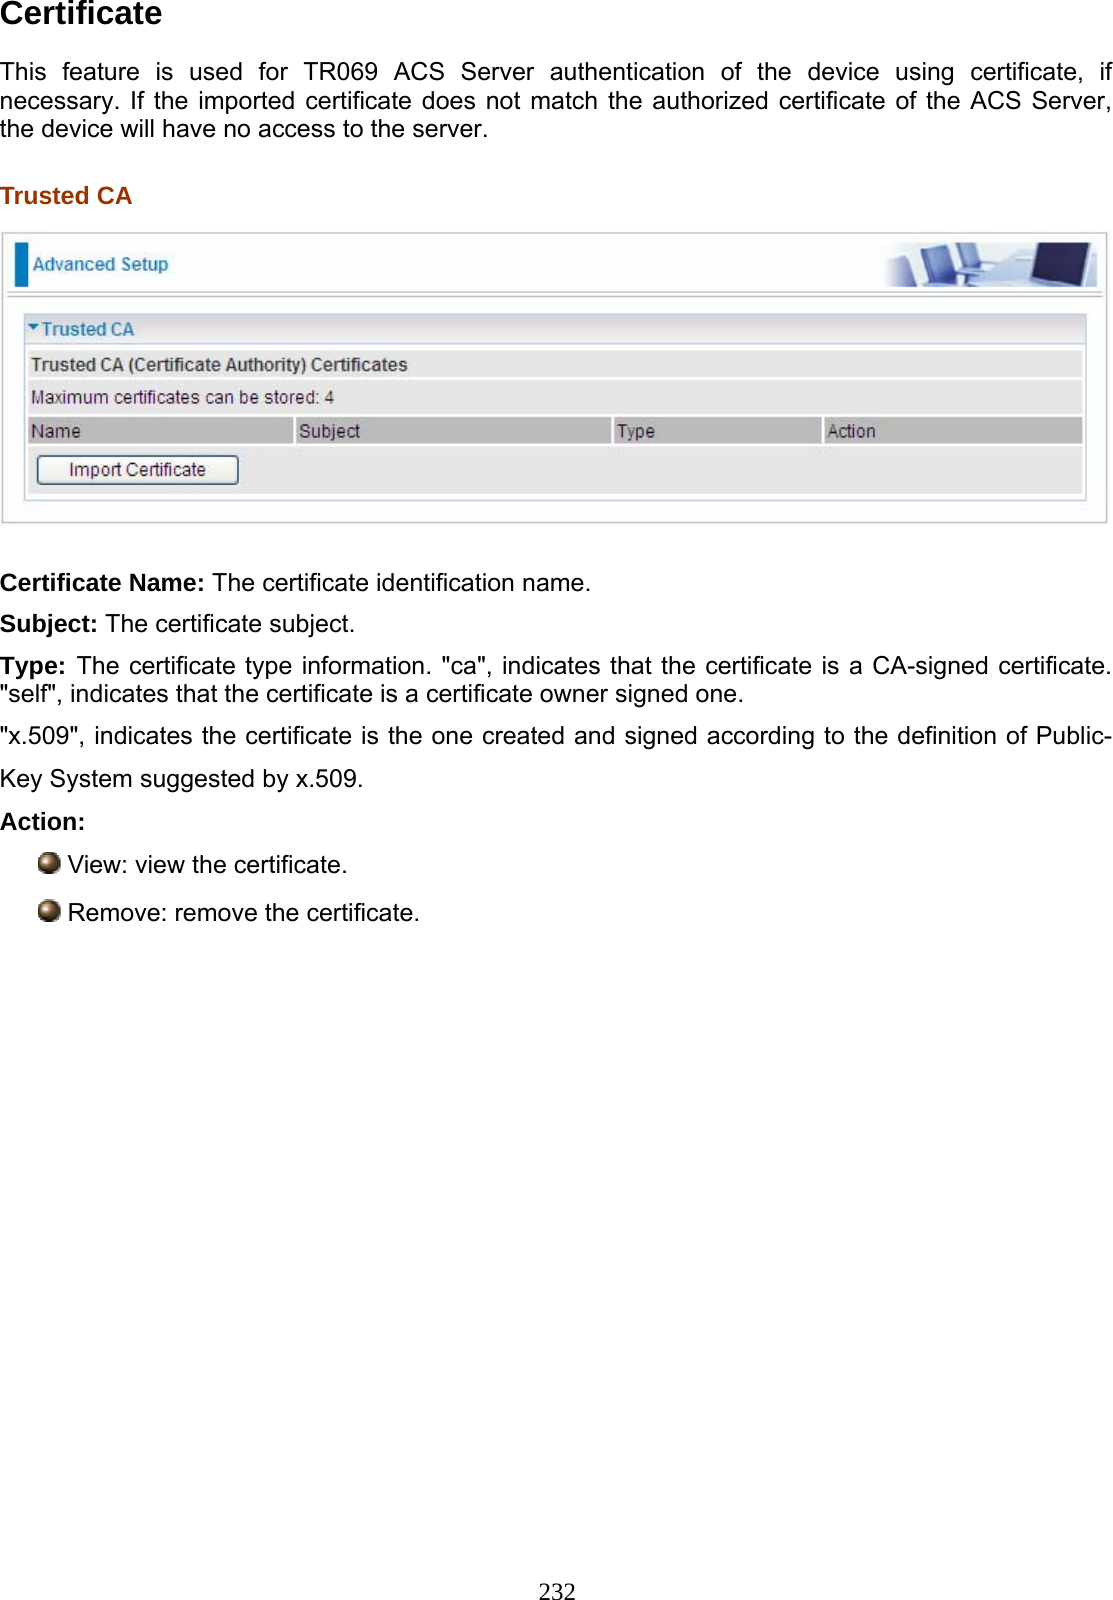 232  Certificate  This feature is used for TR069 ACS Server authentication of the device using certificate, if necessary. If the imported certificate does not match the authorized certificate of the ACS Server, the device will have no access to the server.  Trusted CA   Certificate Name: The certificate identification name. Subject: The certificate subject. Type: The certificate type information. &quot;ca&quot;, indicates that the certificate is a CA-signed certificate. &quot;self&quot;, indicates that the certificate is a certificate owner signed one. &quot;x.509&quot;, indicates the certificate is the one created and signed according to the definition of Public-Key System suggested by x.509. Action:  View: view the certificate.  Remove: remove the certificate.            